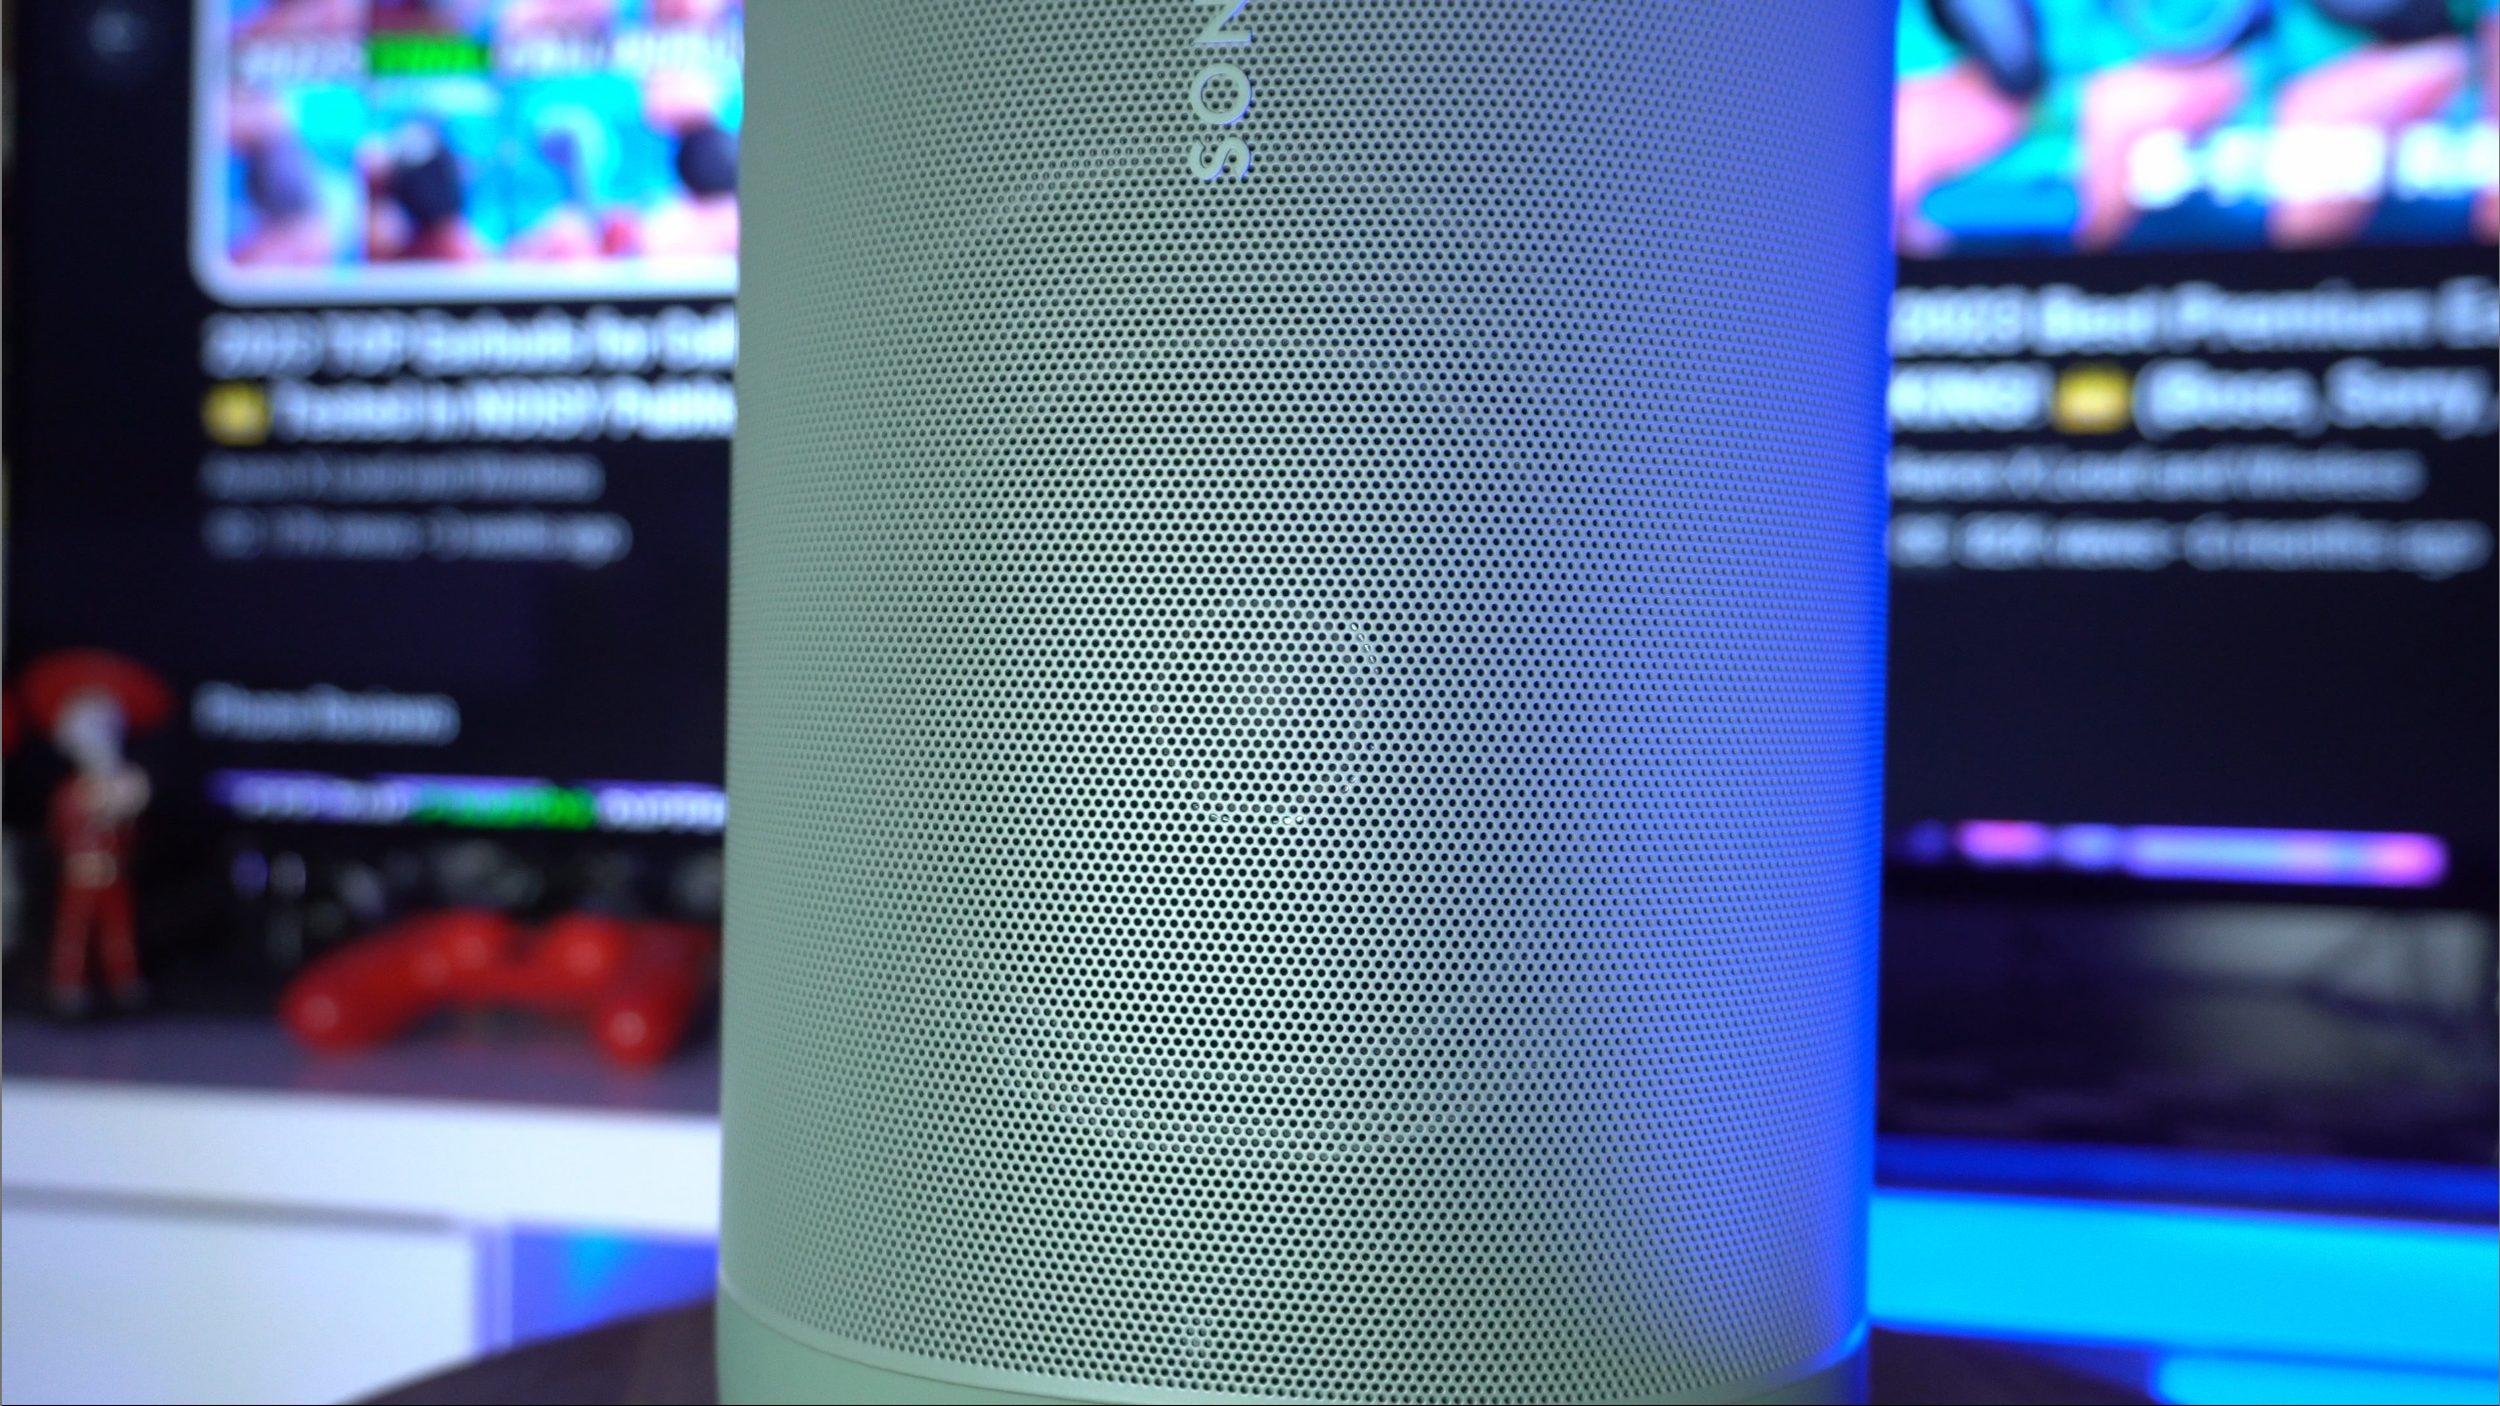 Sonos Move 2 – portable oomph anywhere (sound review) - Cybershack